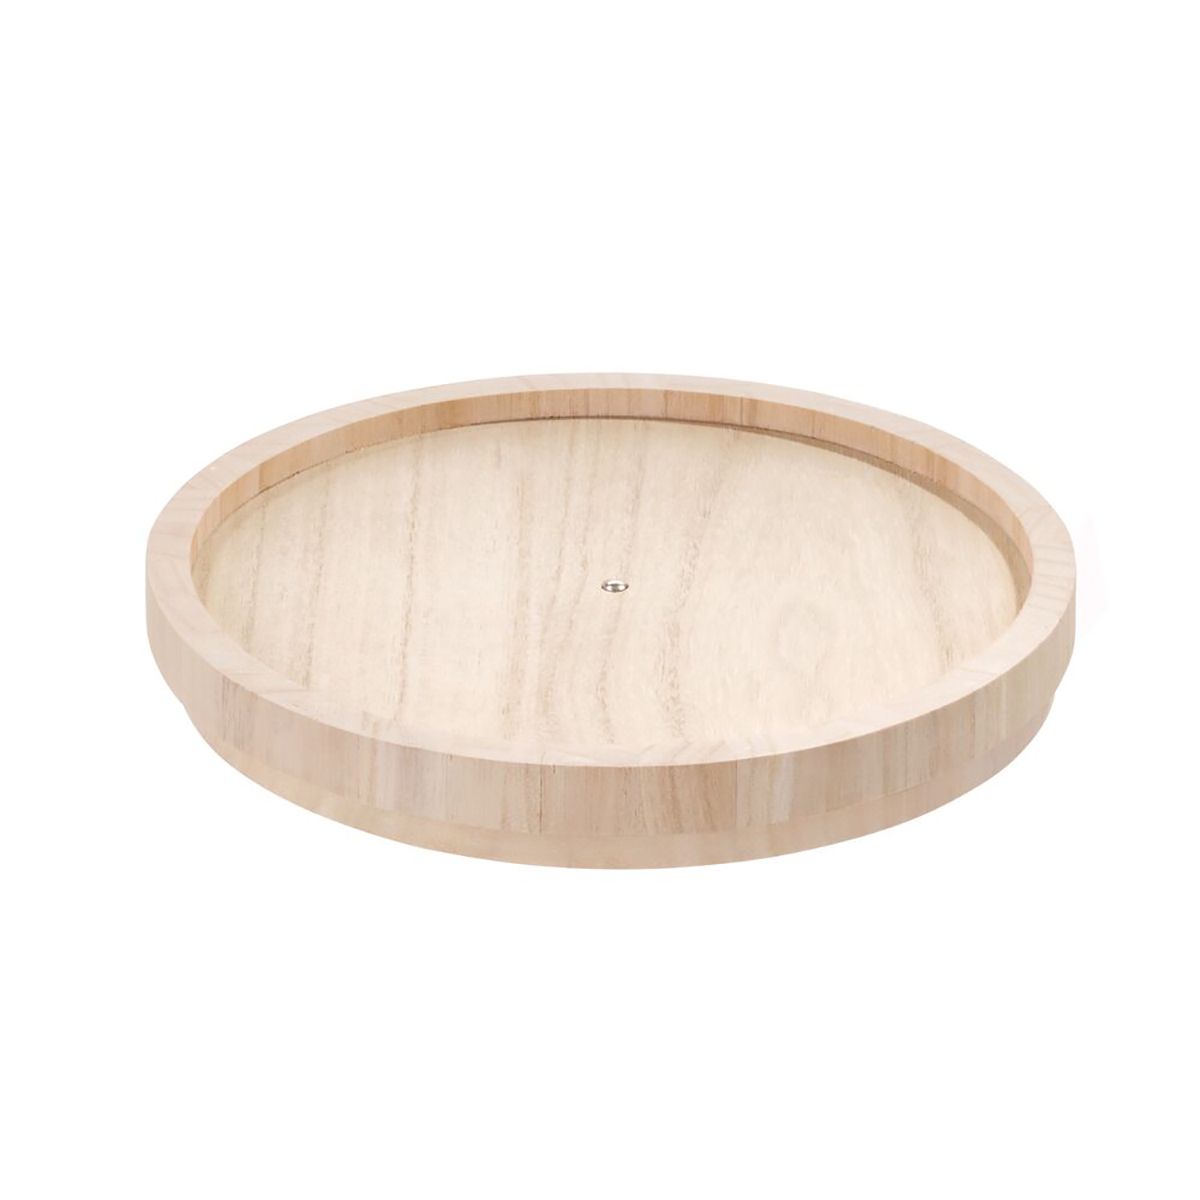 The Home Edit by iDesign 9" Wooden Lazy Susan | The Container Store